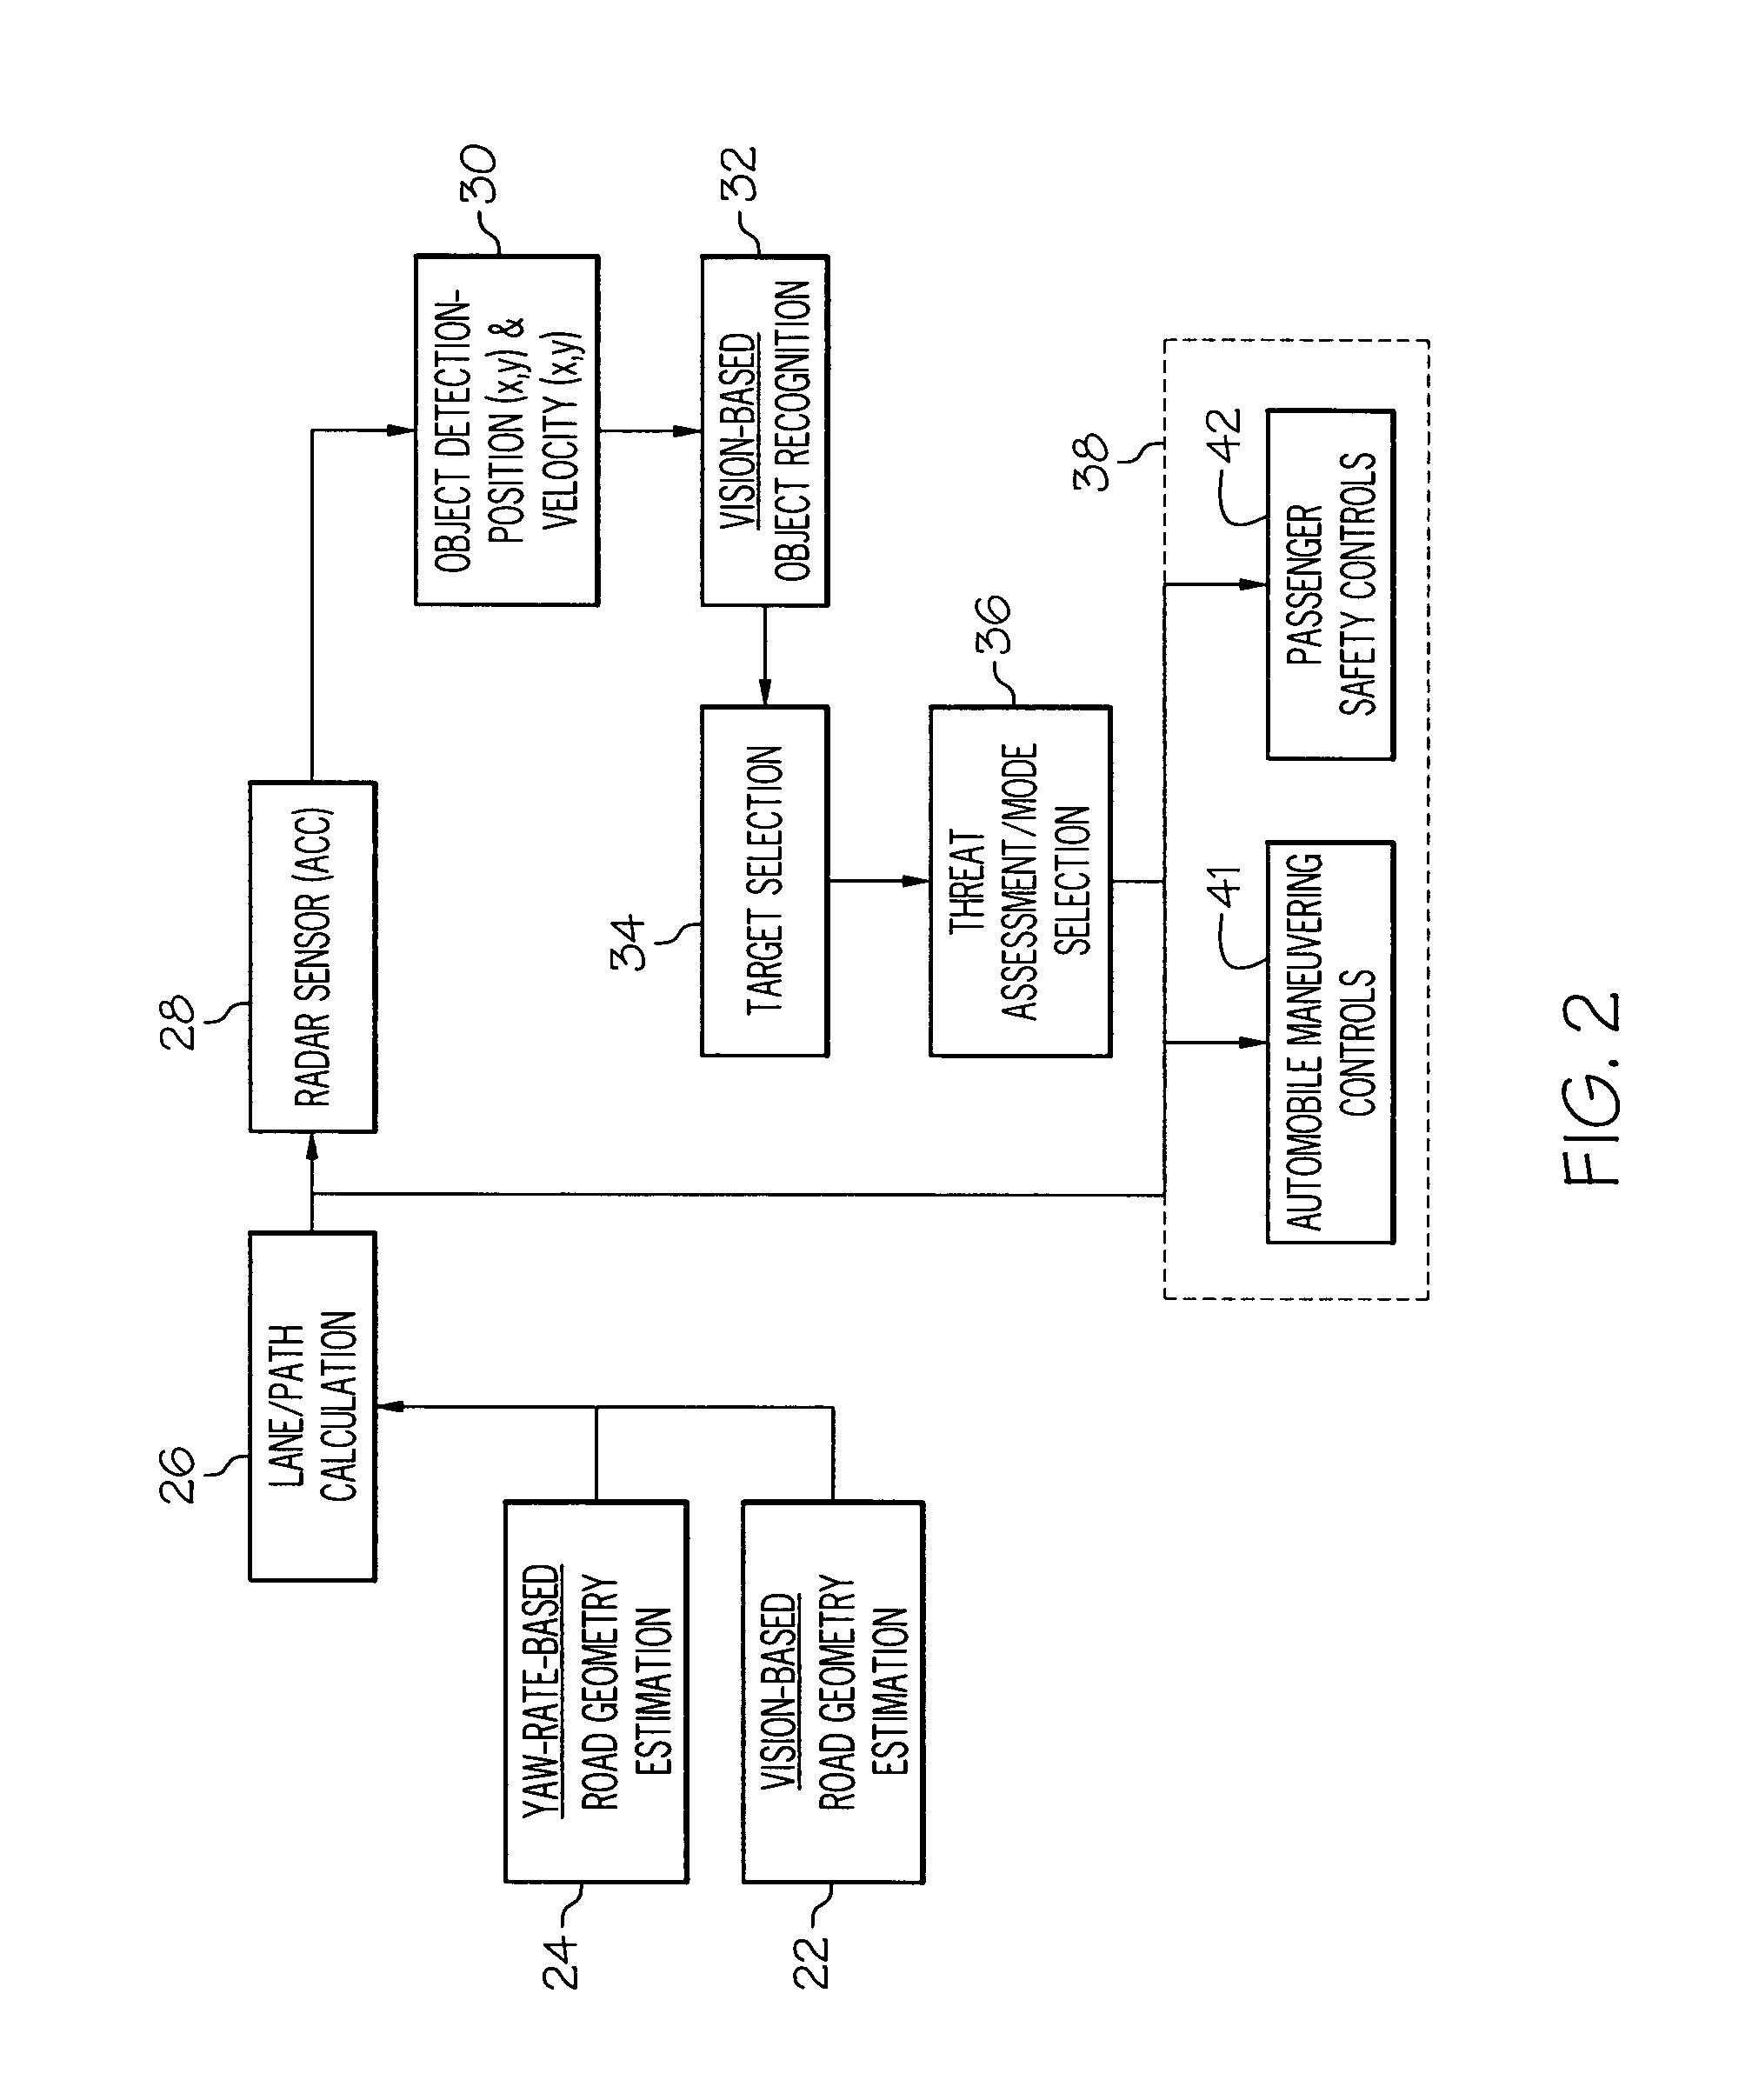 Enhanced adaptive cruise control system with forward vehicle collision mitigation